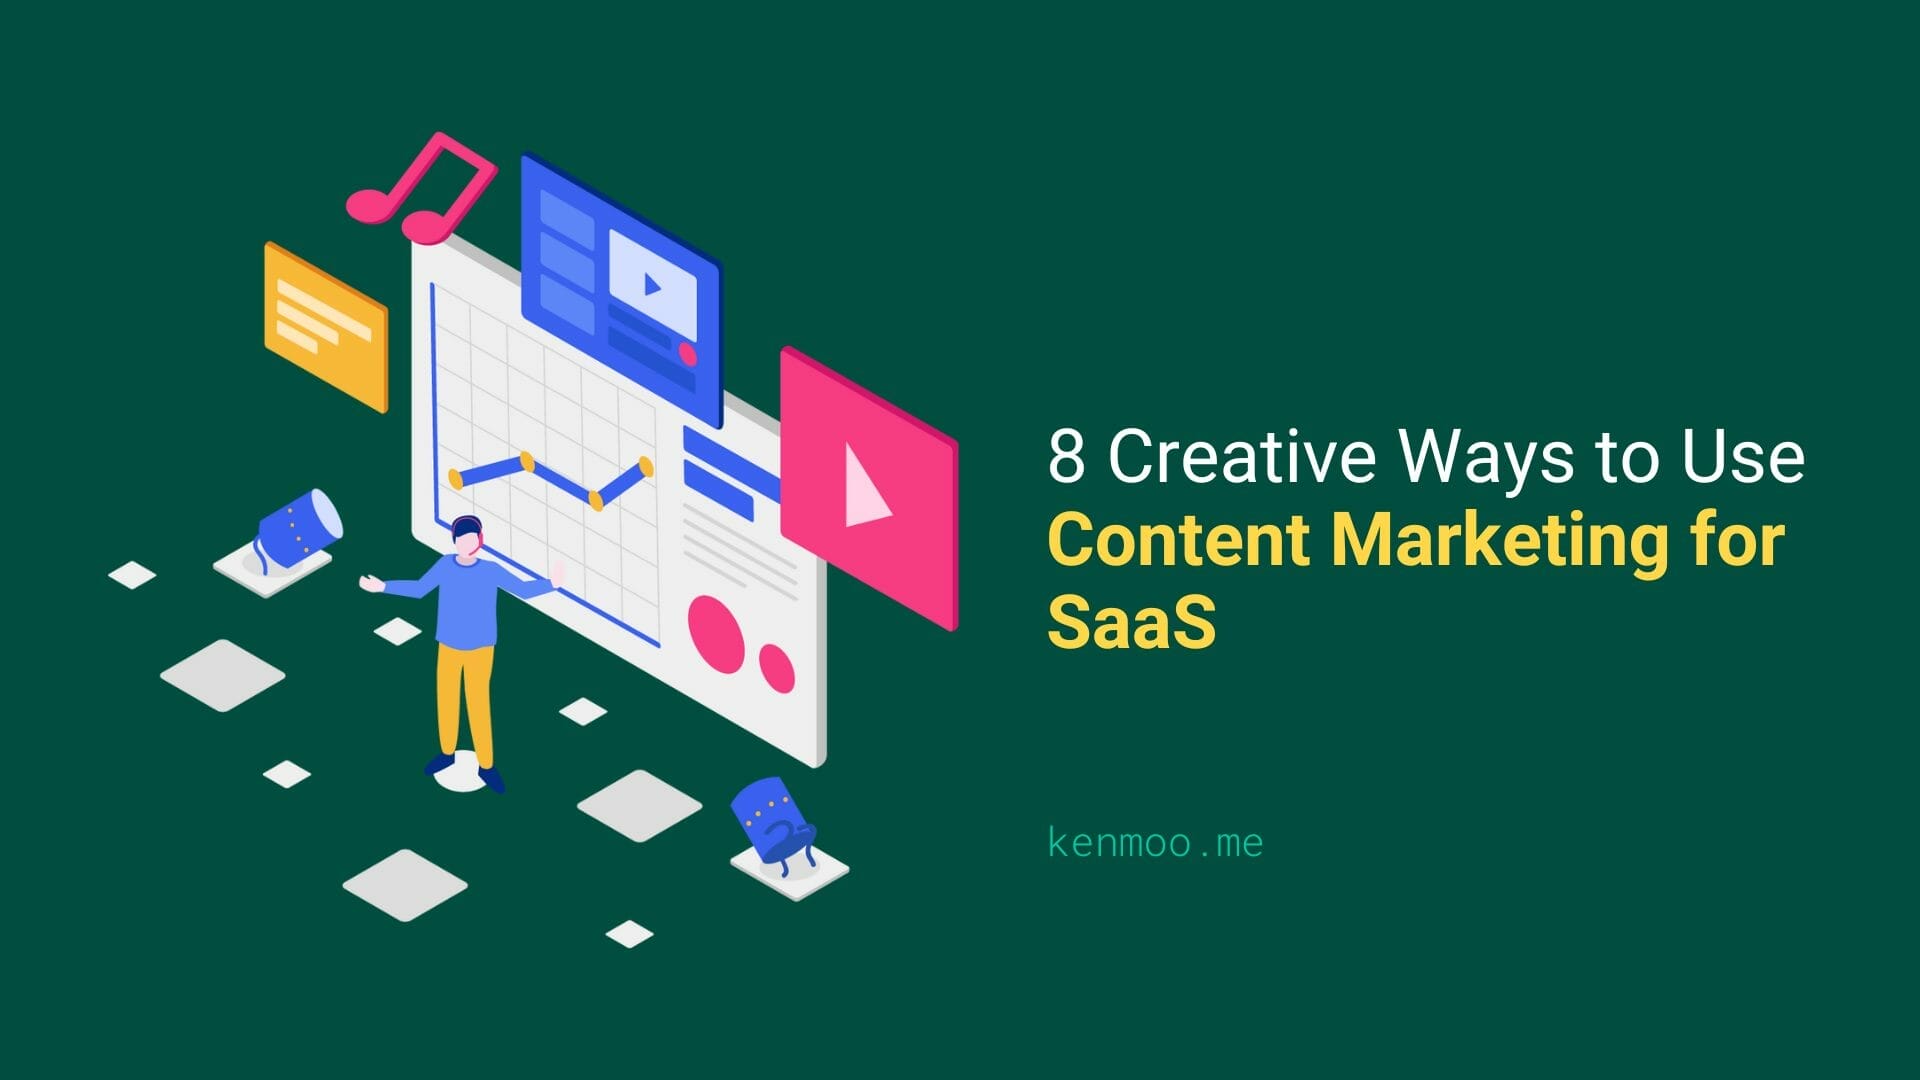 8 Creative Ways to Use Content Marketing for SaaS